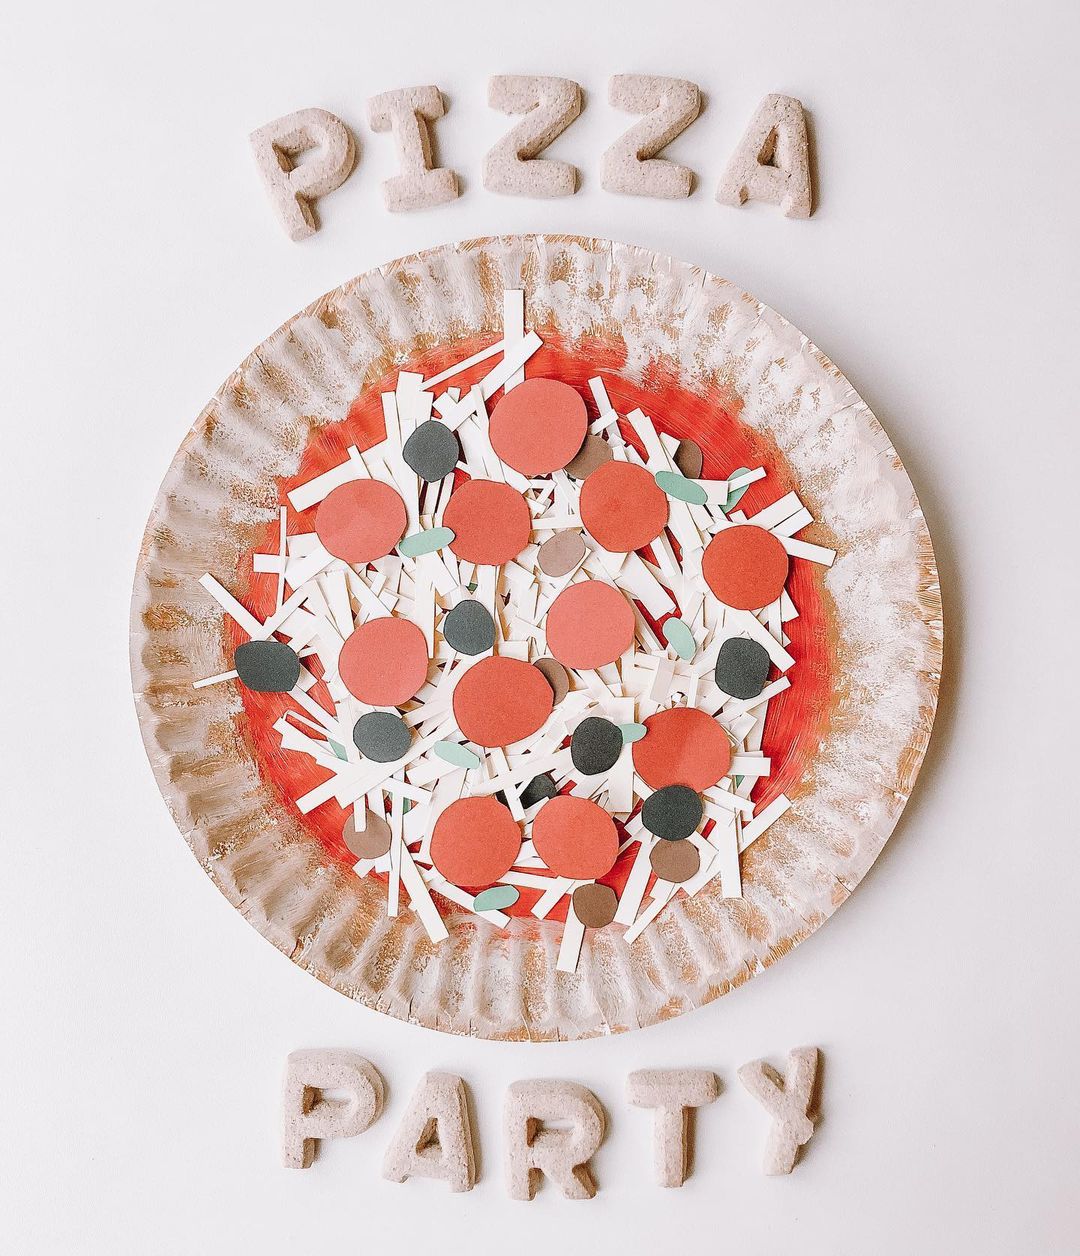 Decorating Pizza from Paper Plate